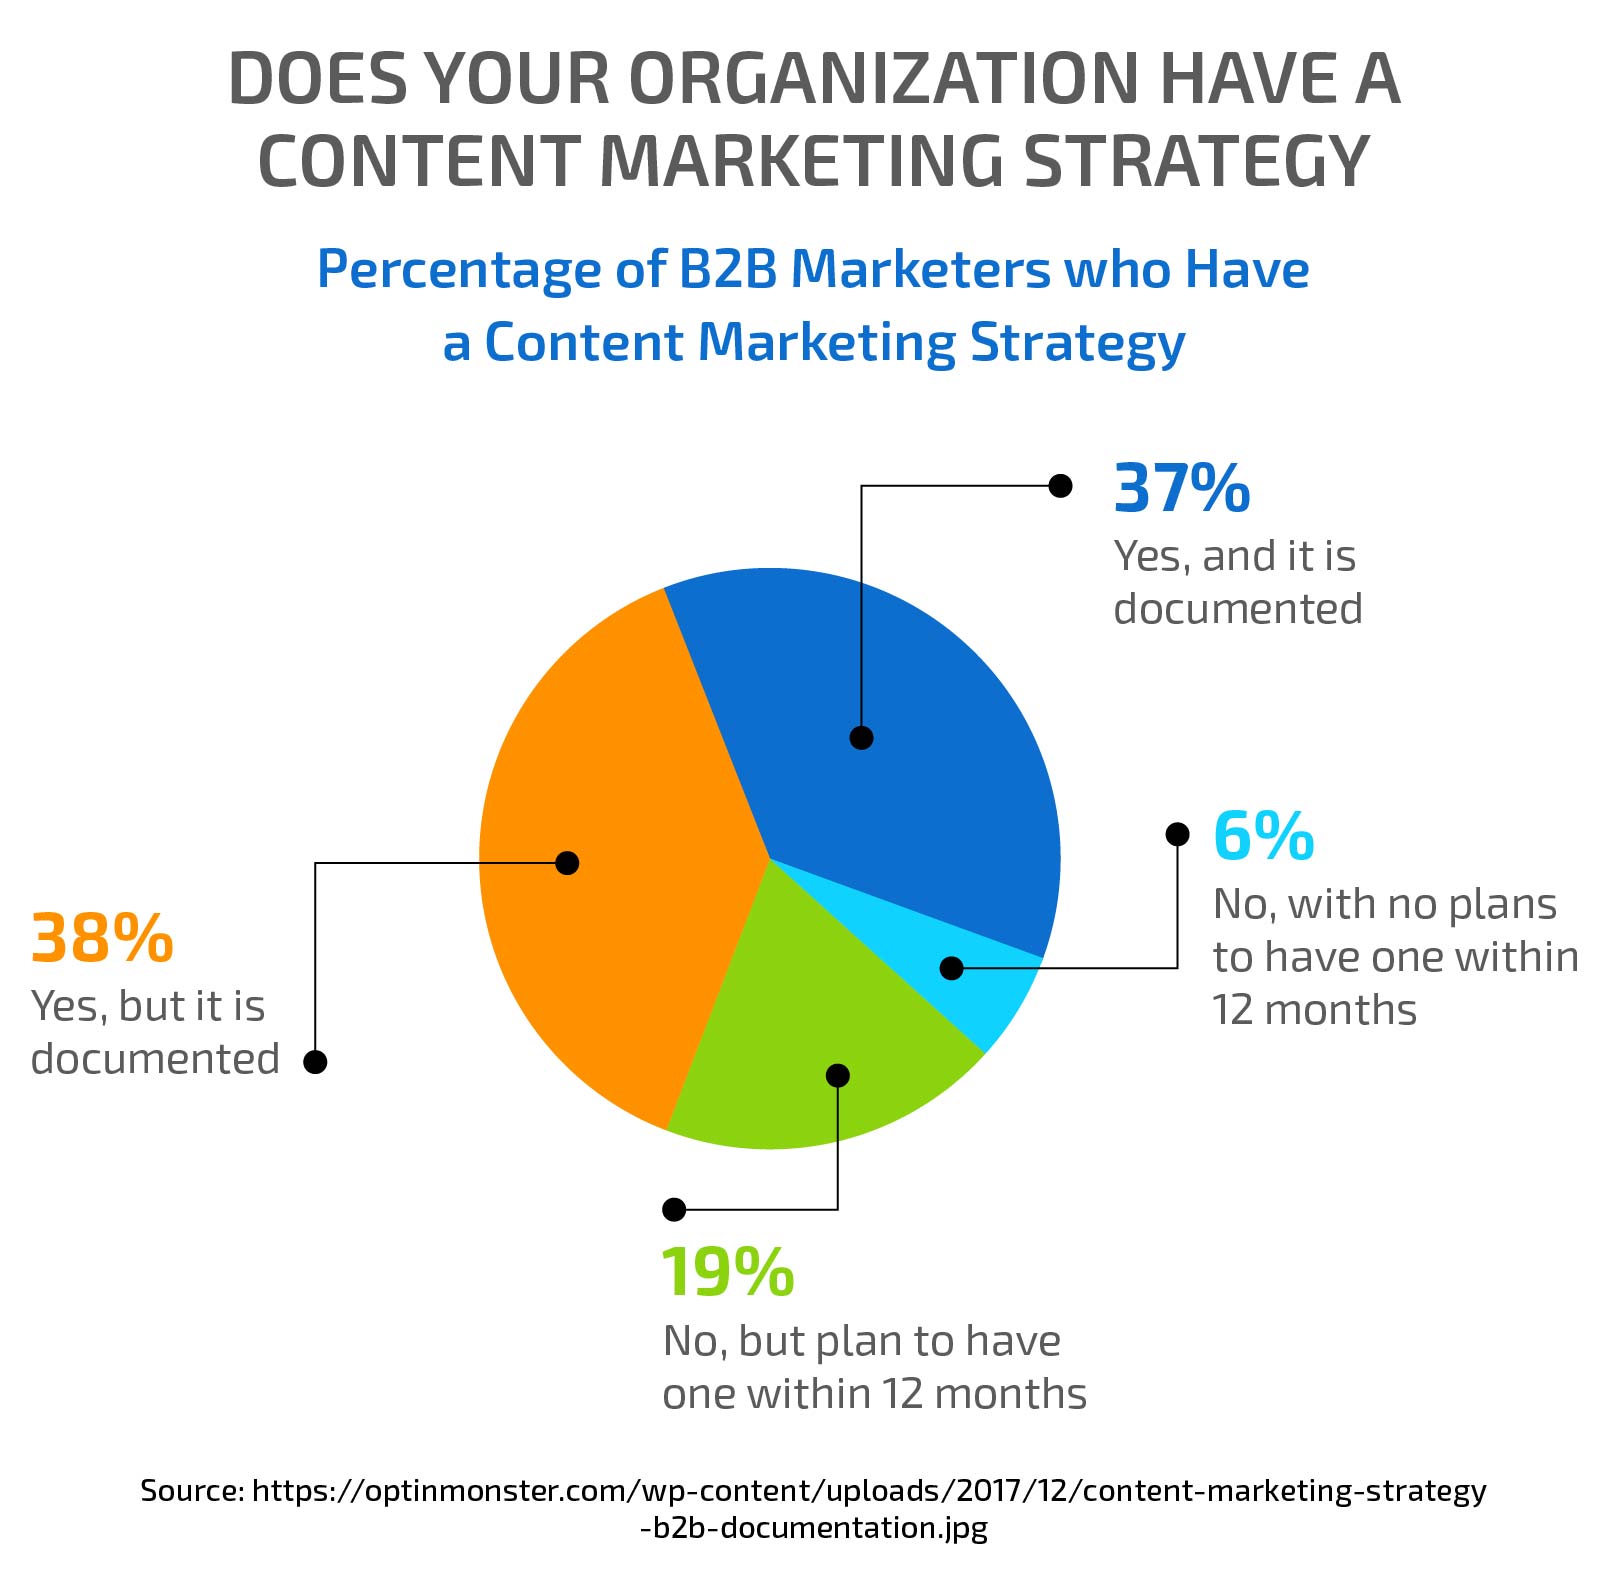 Percentage of B2B Marketers Who Have Opted for Content Marketing Strategy